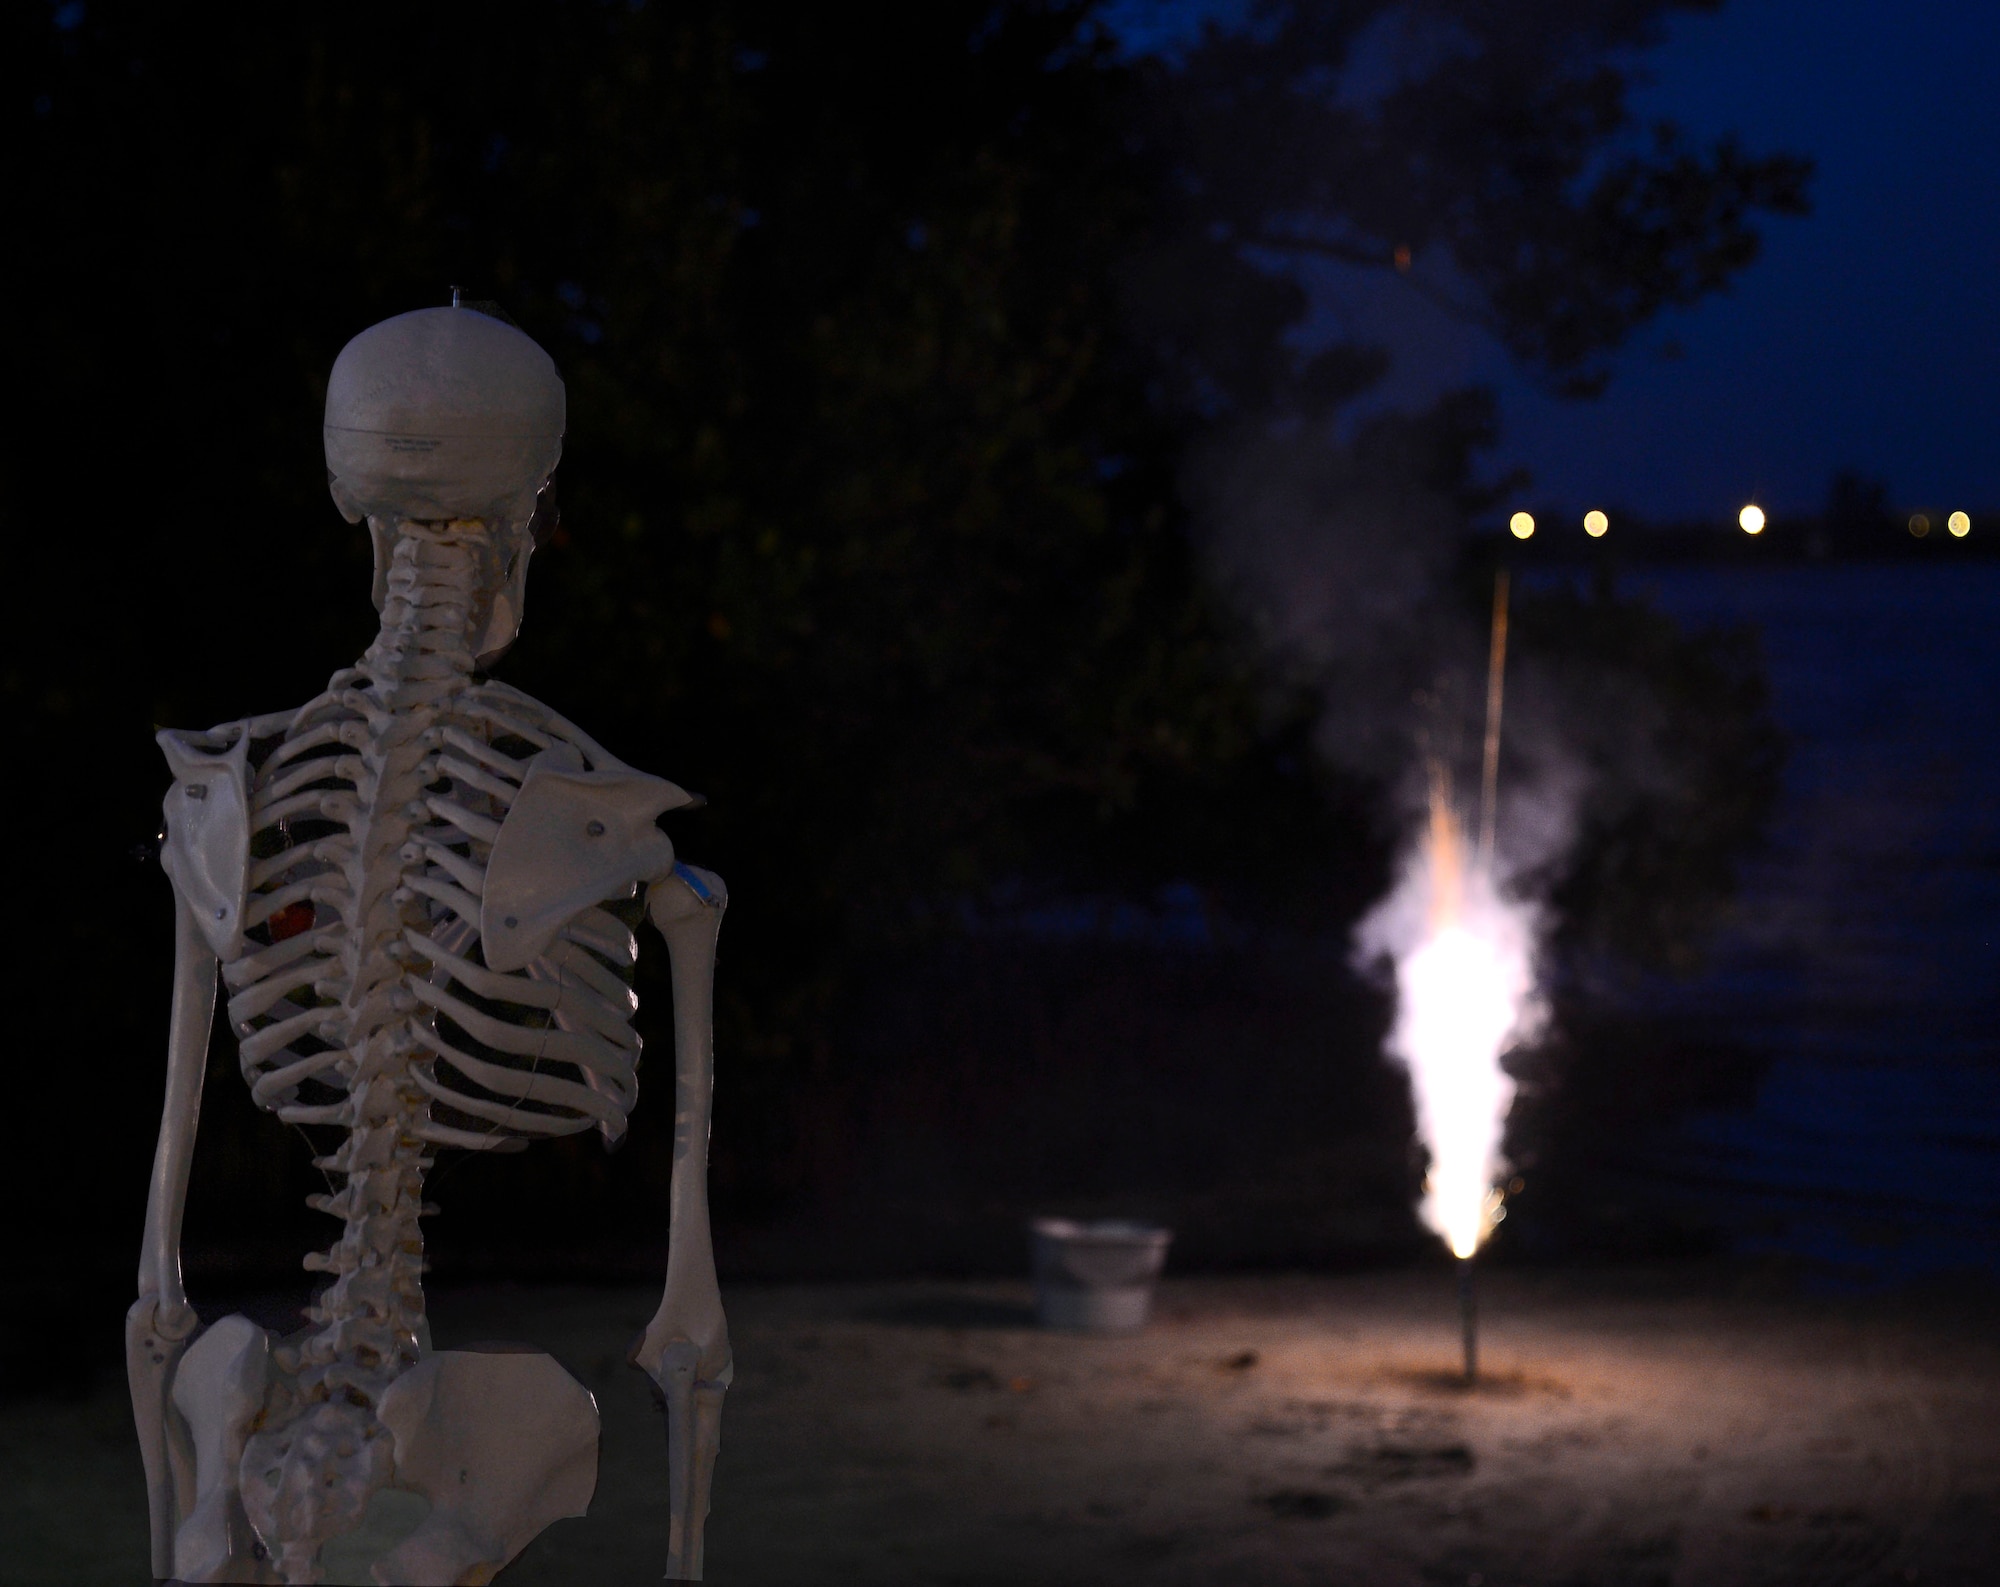 MacBones, 6th Air Mobility Wing safety skeleton, watches a firework from a safe distance at a beach in Tampa, Fla., June 17, 2014. Fireworks should only be lit on the ground and a bucket of water should be close by to put out fires. (U.S. Air Force photo by Airman 1st Class Tori Schultz/Released)